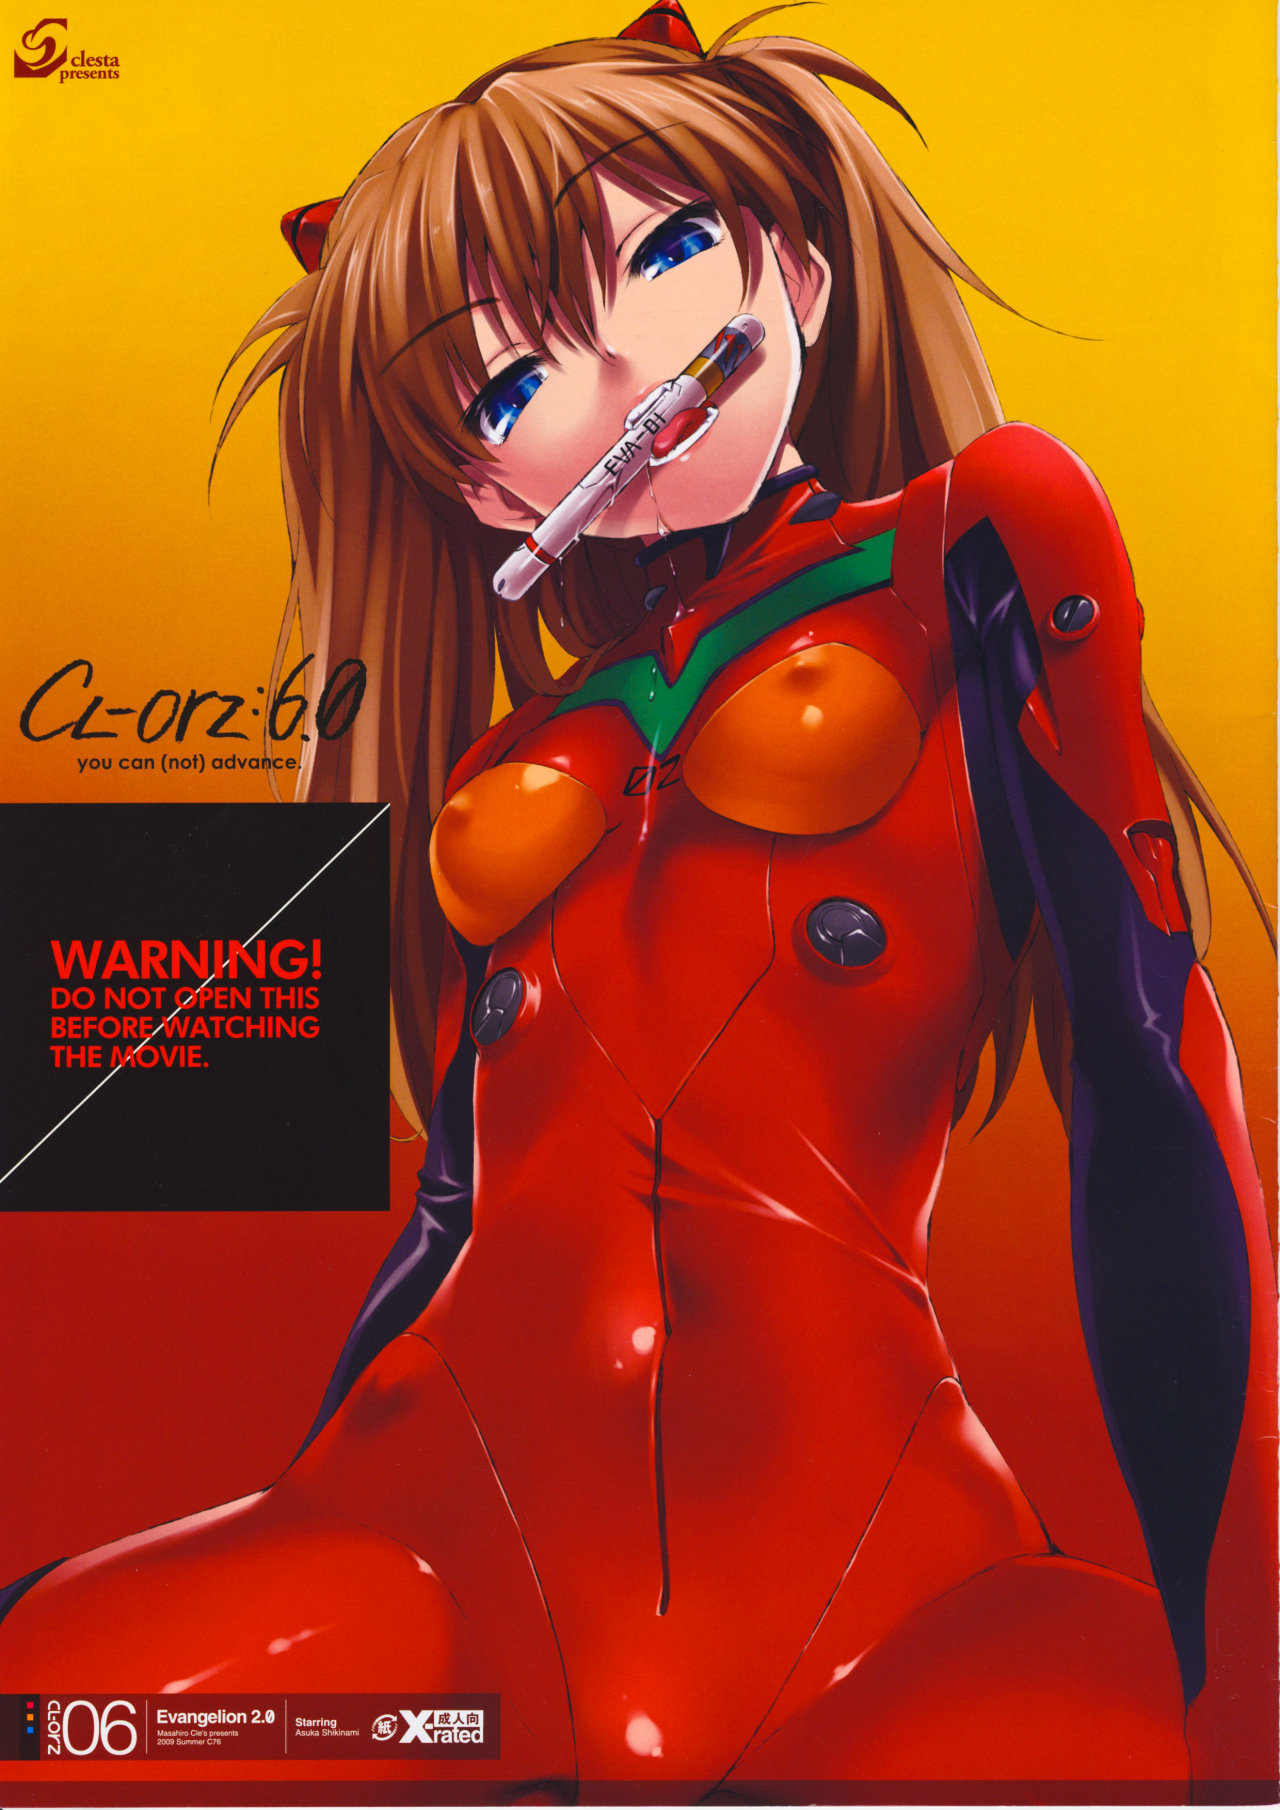 CL-orz 6 you can (not) advance (decensored) (Neon Genesis Evangelion) - Cle Masahiro - 0